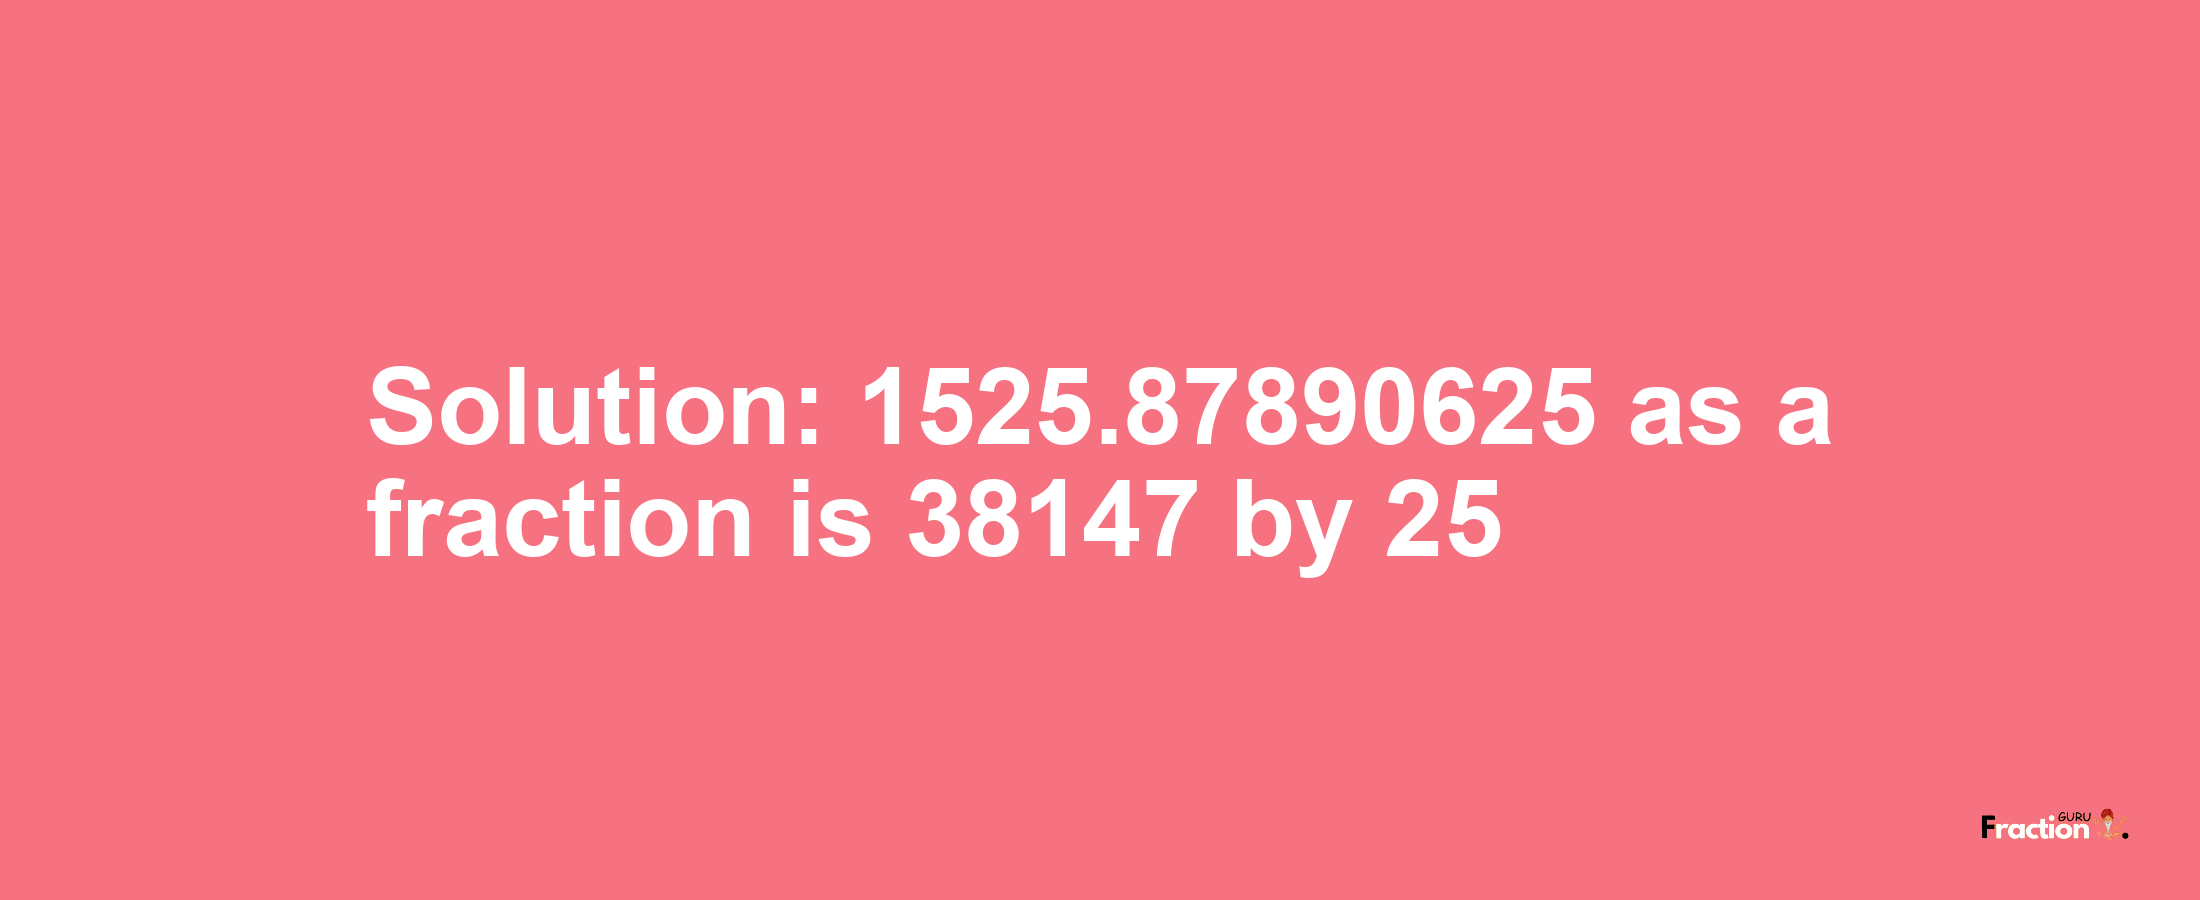 Solution:1525.87890625 as a fraction is 38147/25